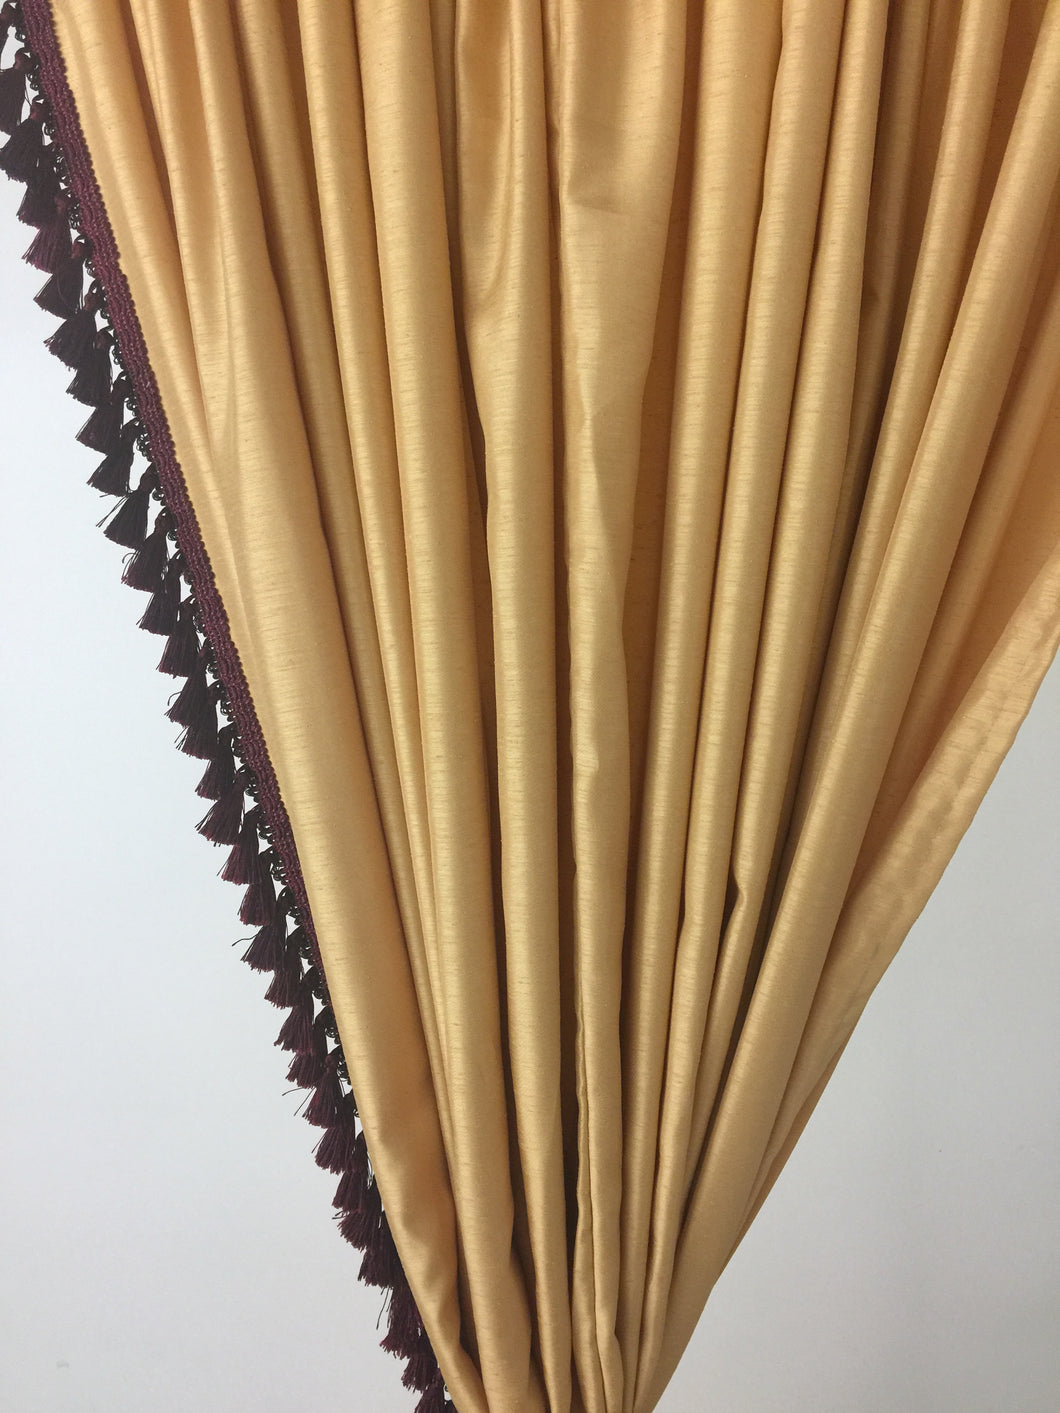 9059 - Yellow/Gold with Burgundy tassel trim - Fully trimmed Valance available